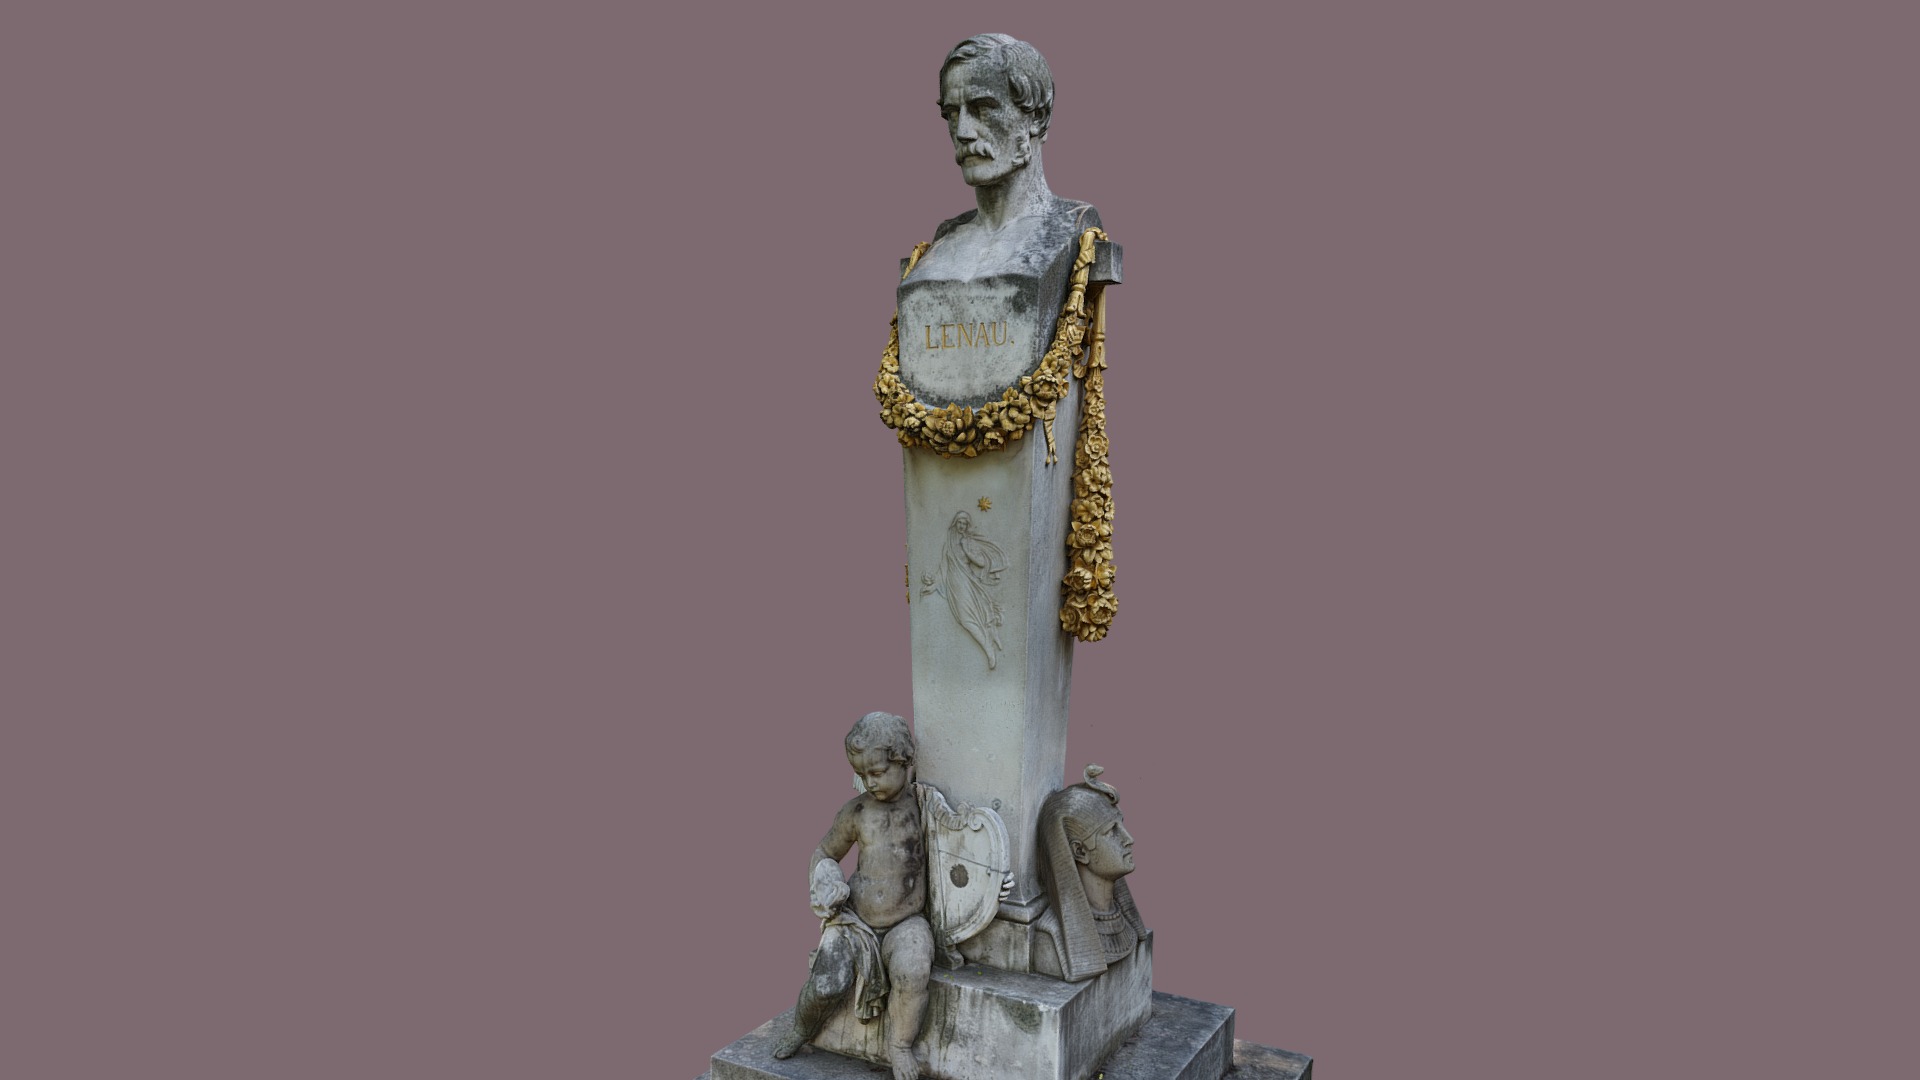 3D model Lenau Denkmal - This is a 3D model of the Lenau Denkmal. The 3D model is about a statue of a person and children.